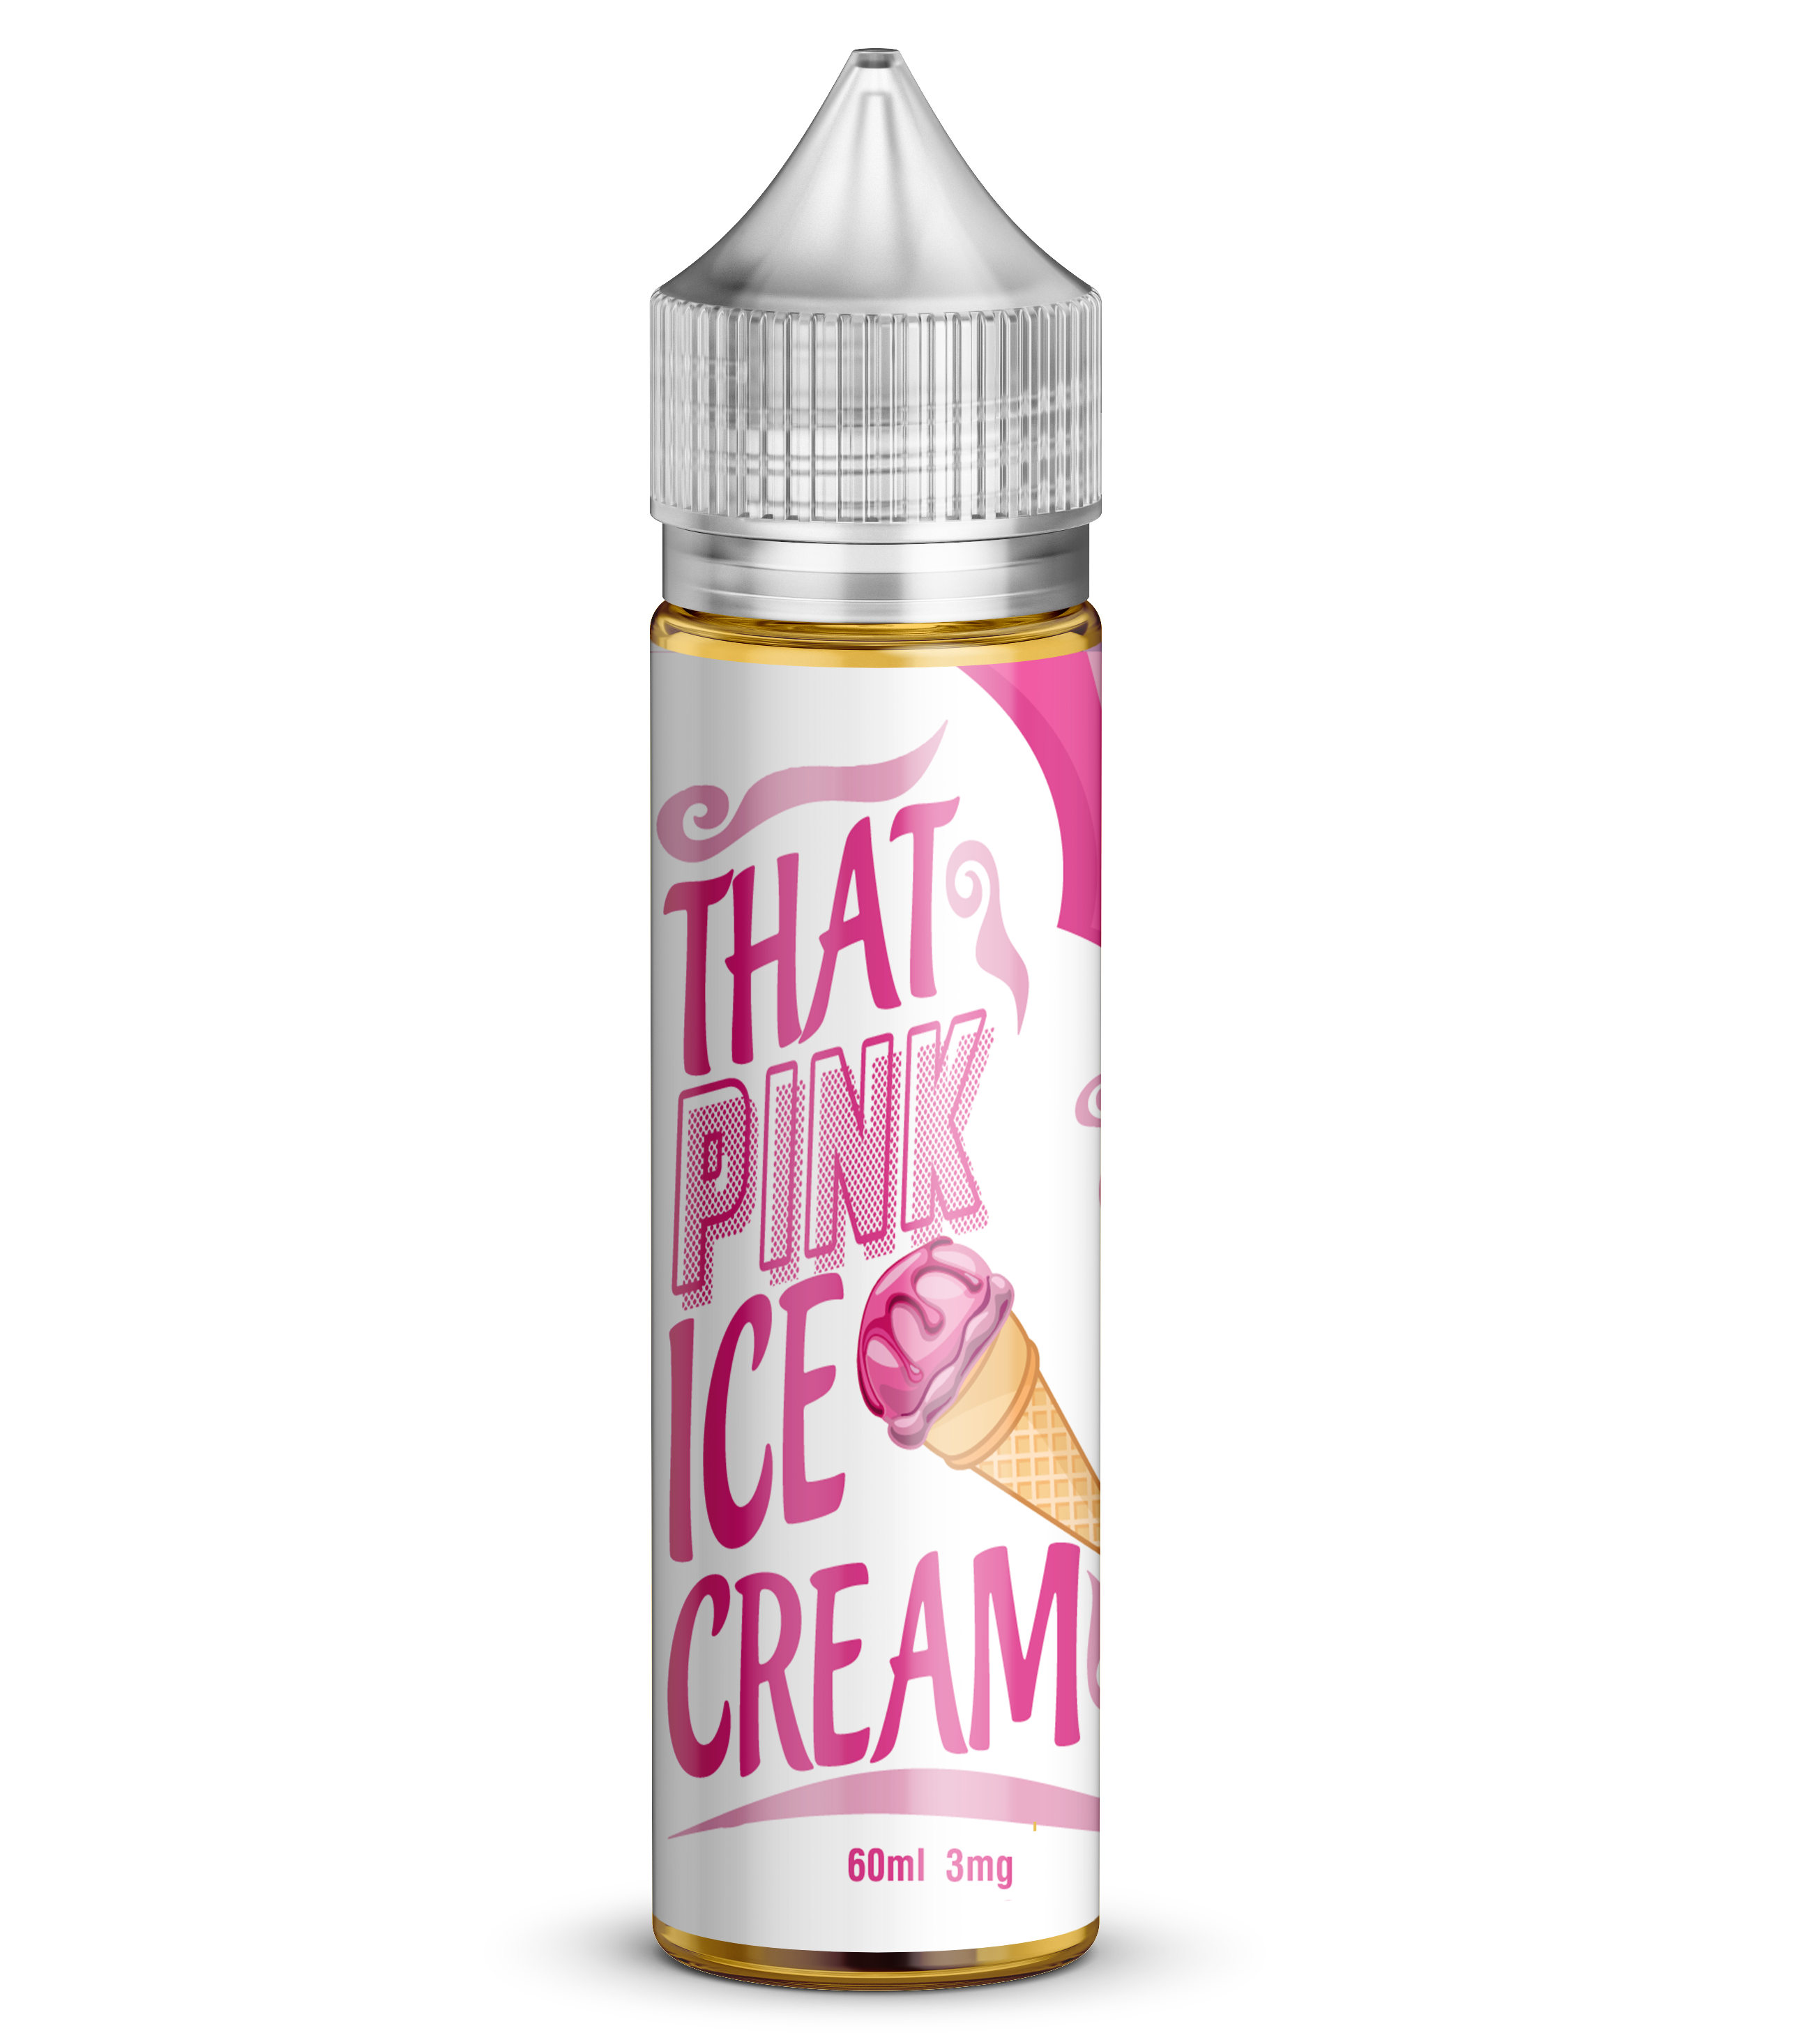 That Pink Ice Cream by Phat Harry 60ml